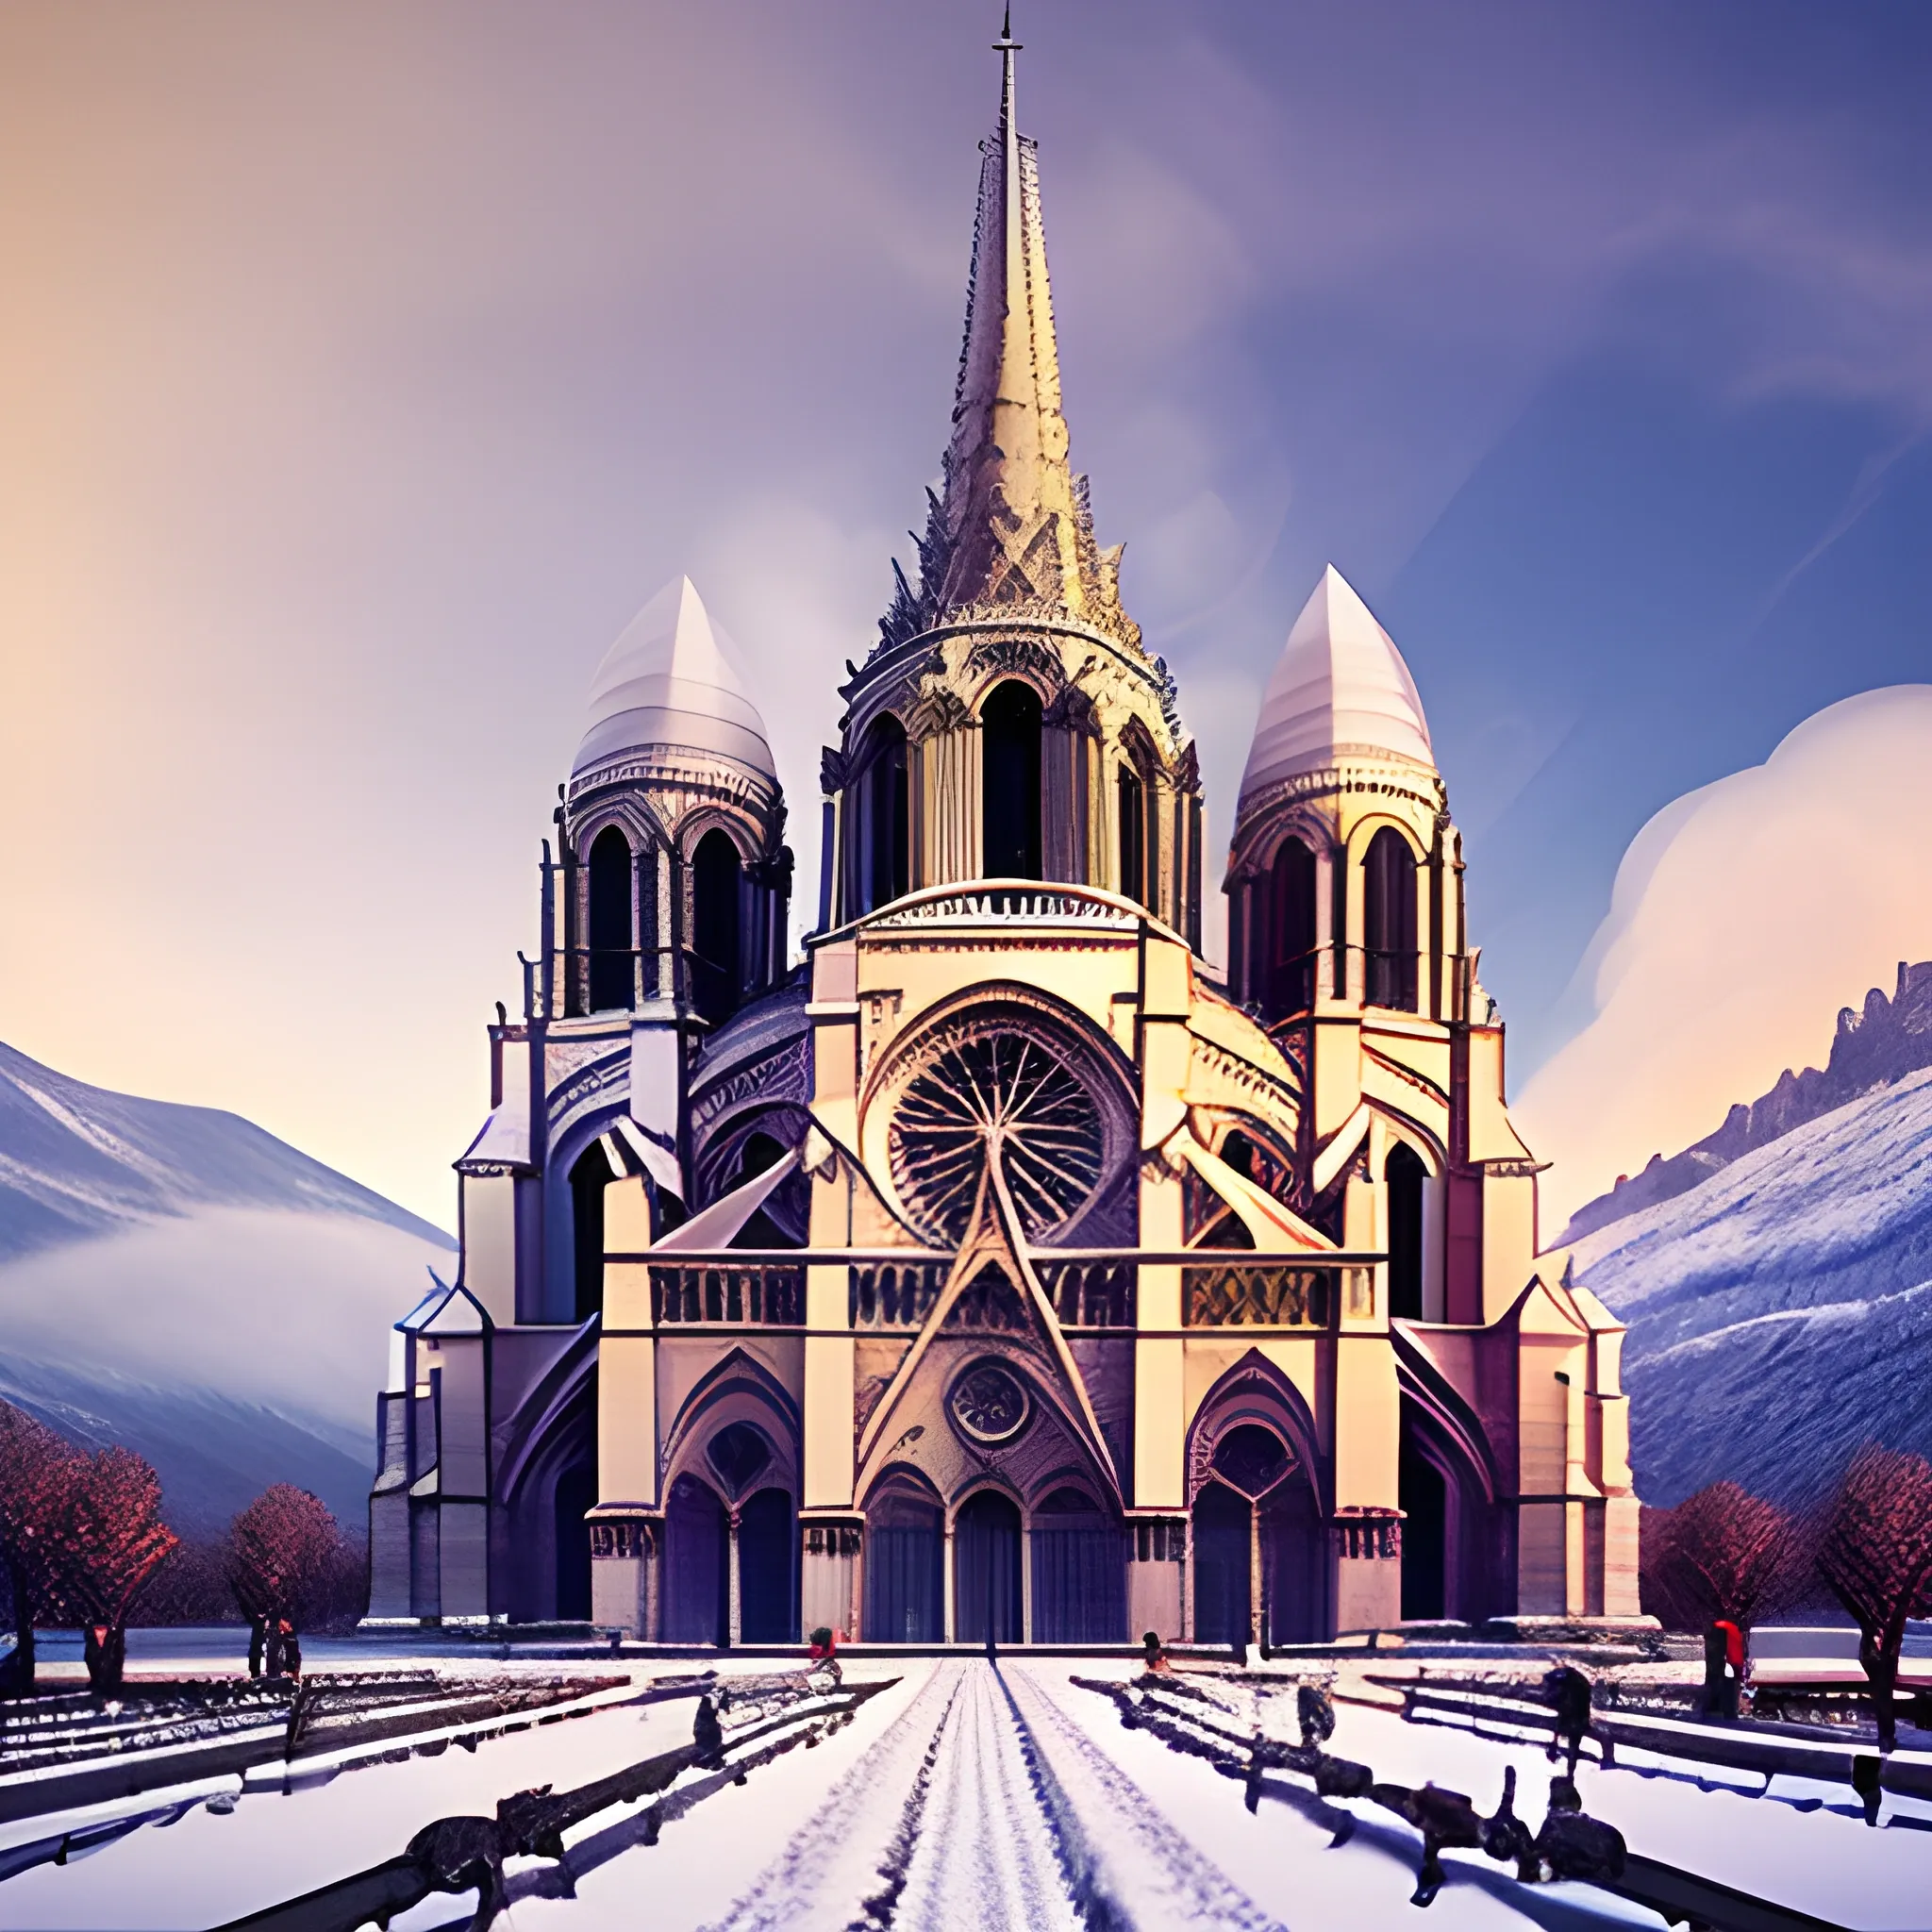 Cathédrale style Paris in an bigest elven city in the mountains, elegant, sunny, impressive, high-detail, snow, red smoke floating above 